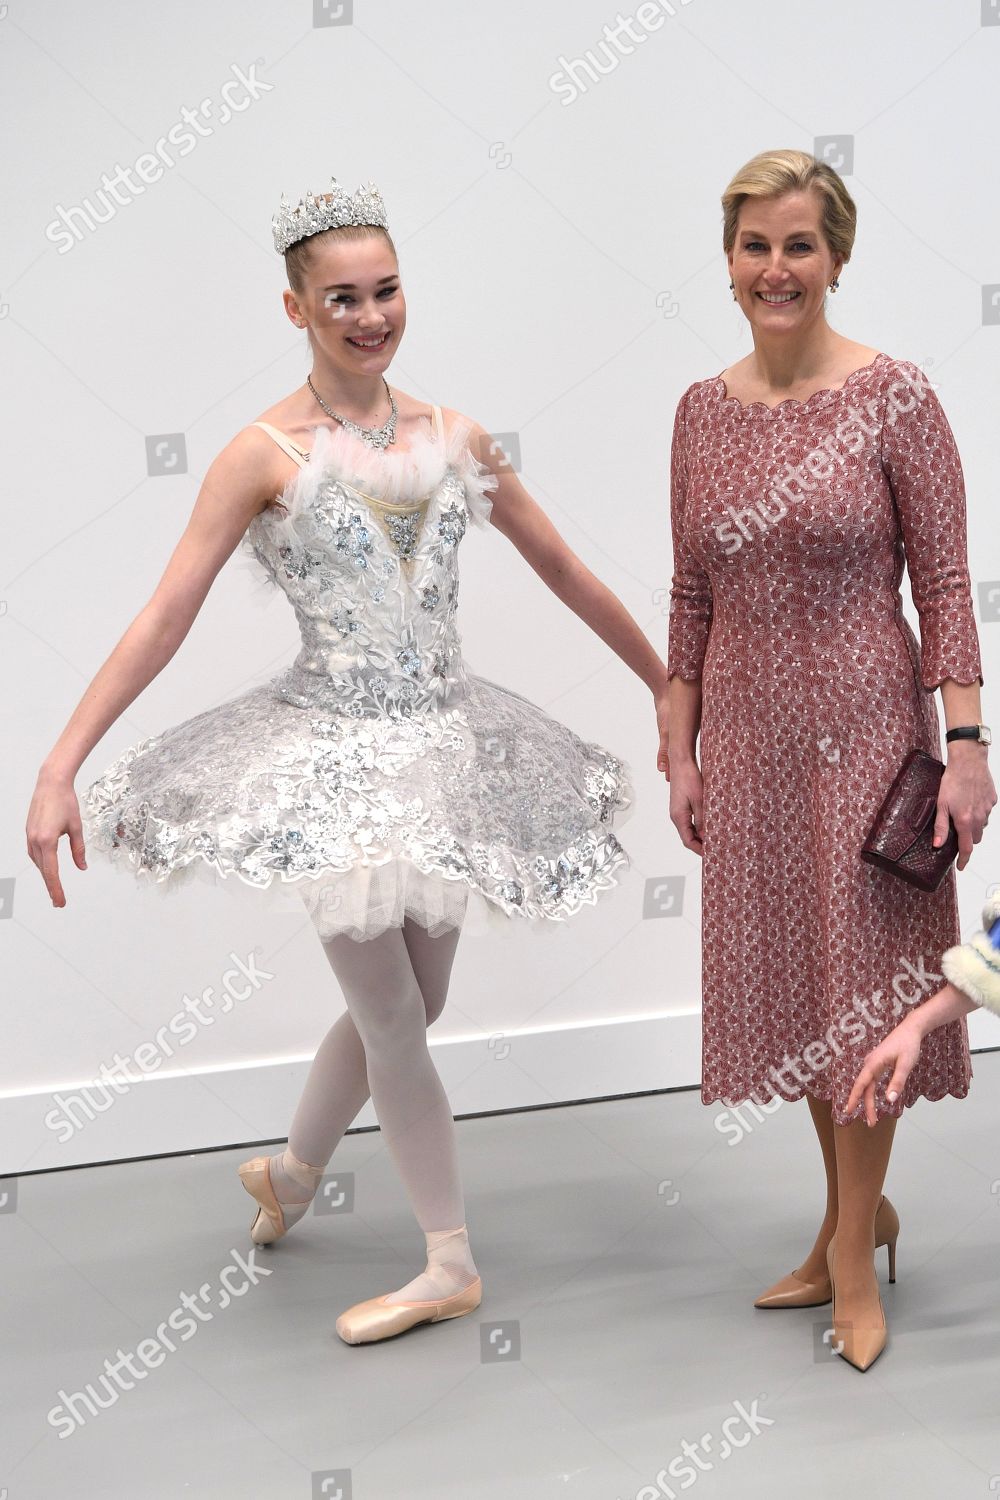 sophie-countess-of-wessex-opens-a-new-studio-for-central-school-of-ballet-london-uk-shutterstock-editorial-10568616p.jpg